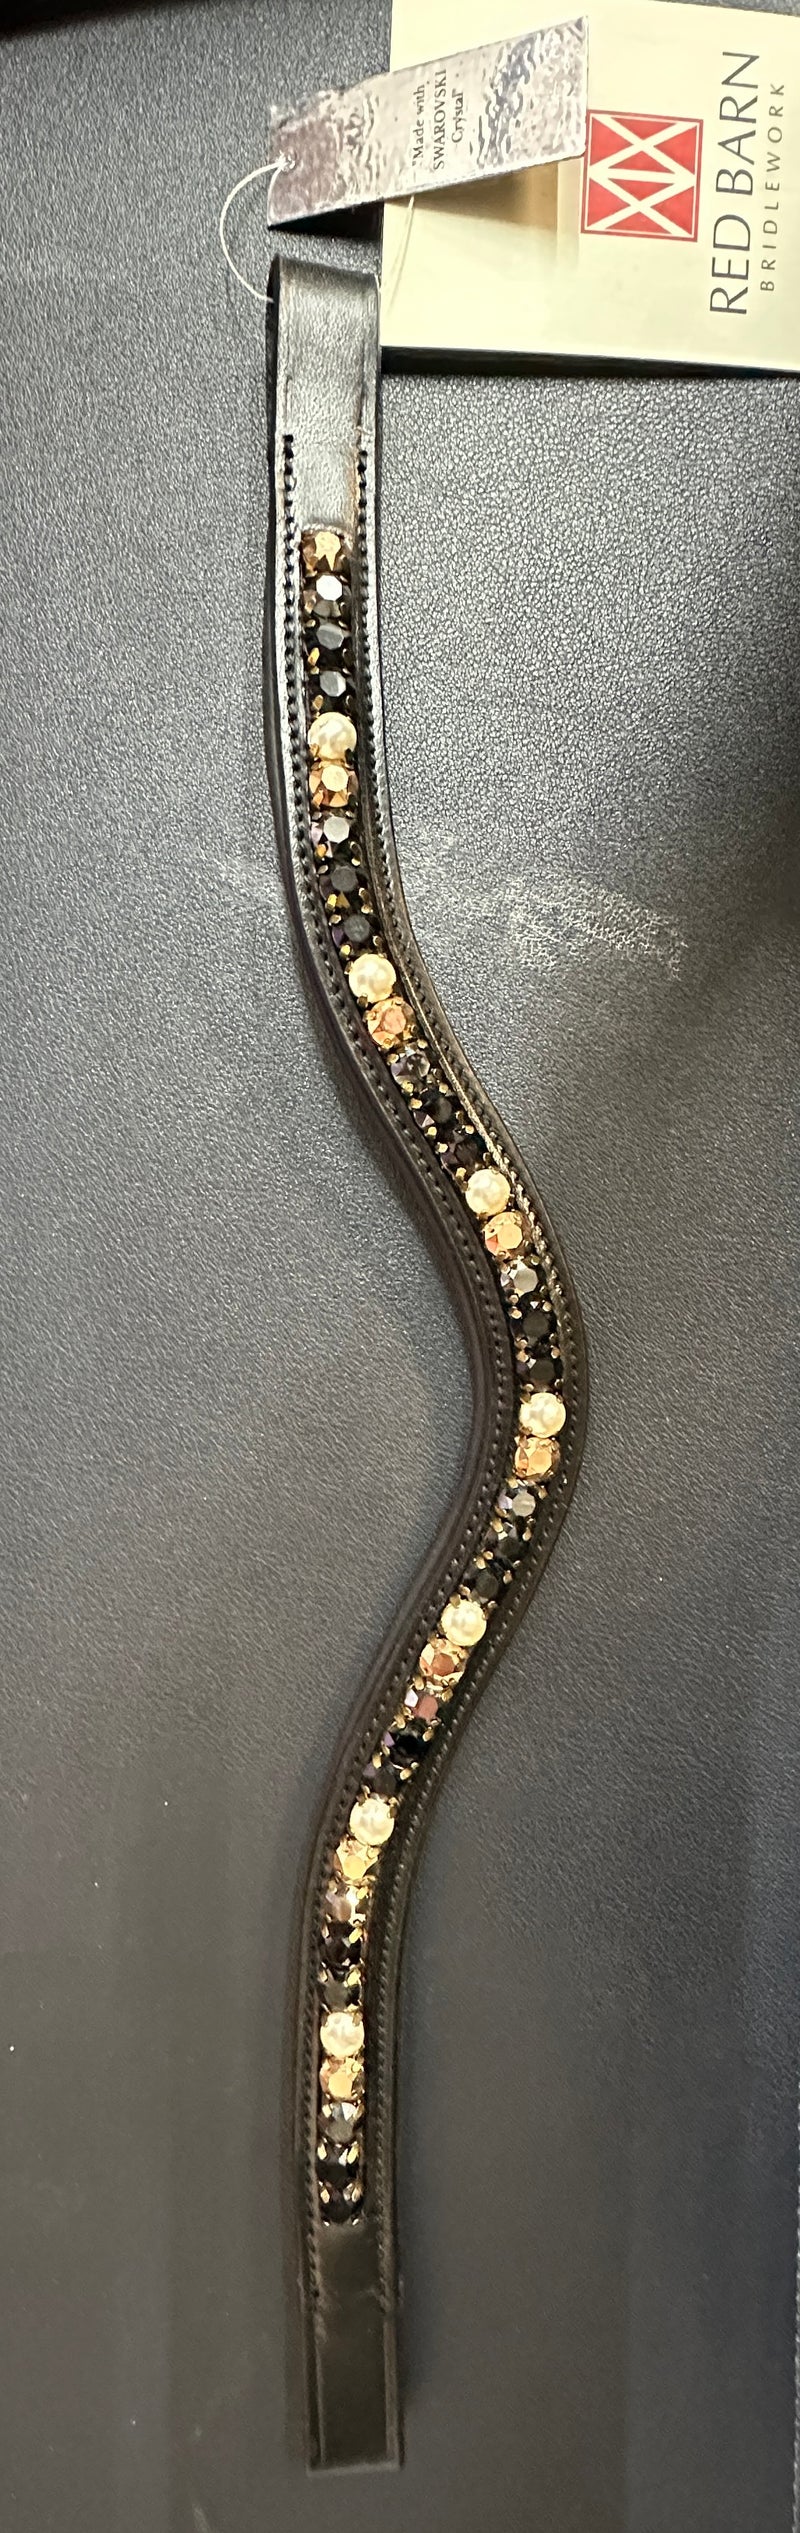 Red Barn Curved Browband